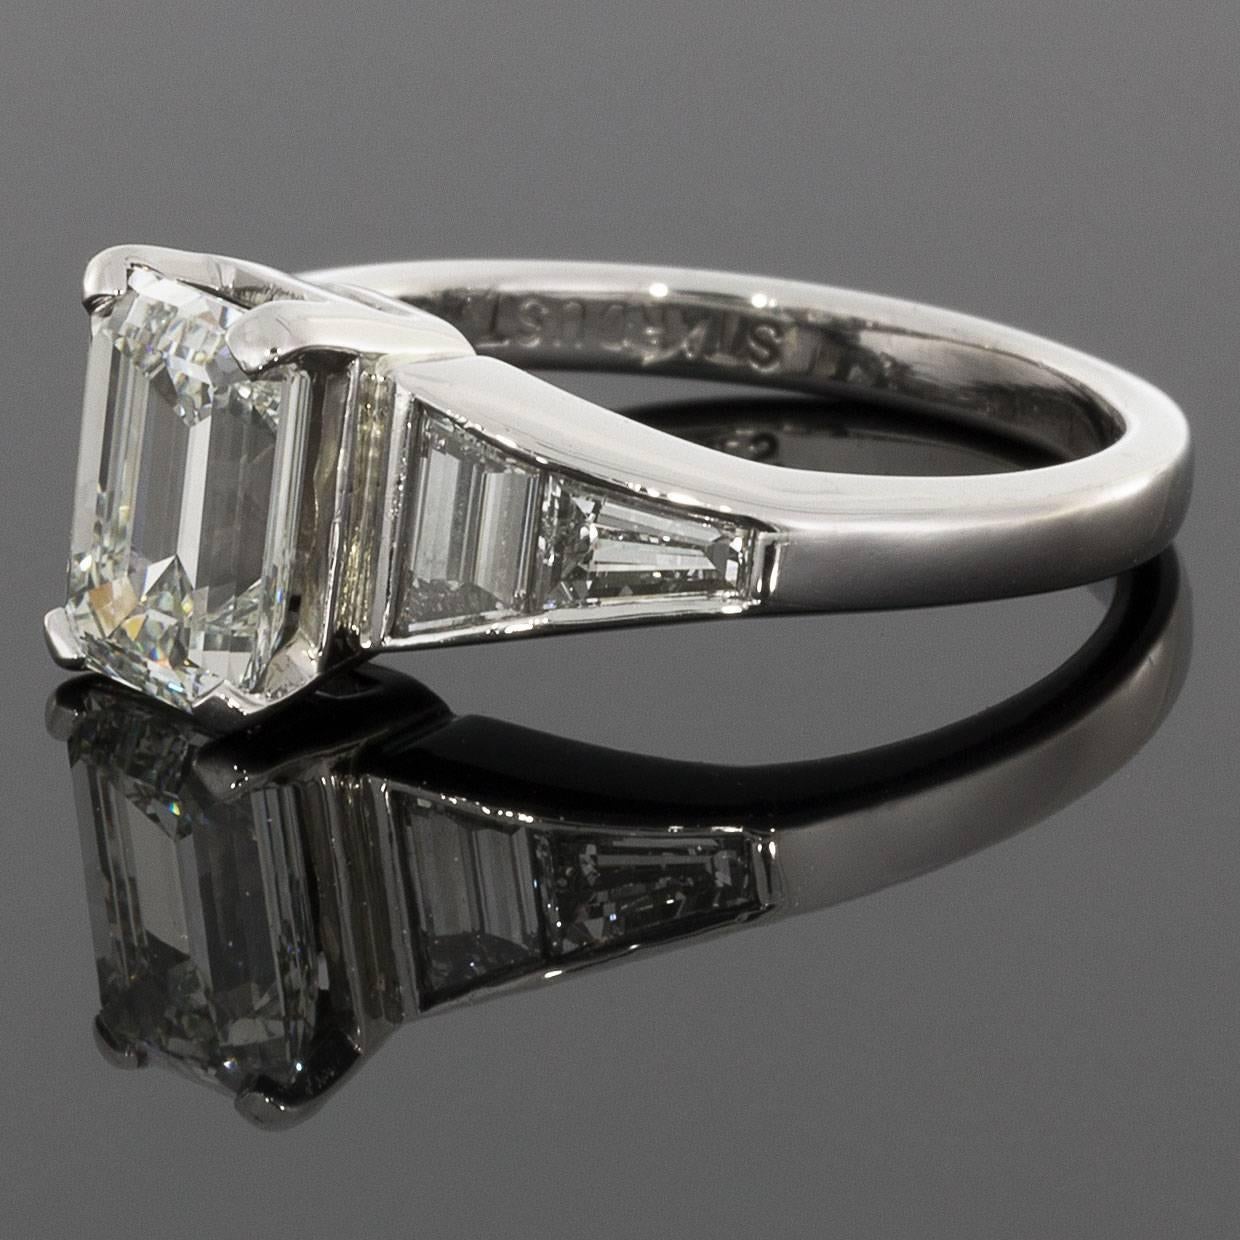 This spectacular ring features a gorgeous Art Deco style design. The dazzling center diamond is a 1.53 carat emerald cut diamond that is GIA certified as I/VS2 in quality. It is prong set in a vintage platinum ring. The ring also features beautiful,